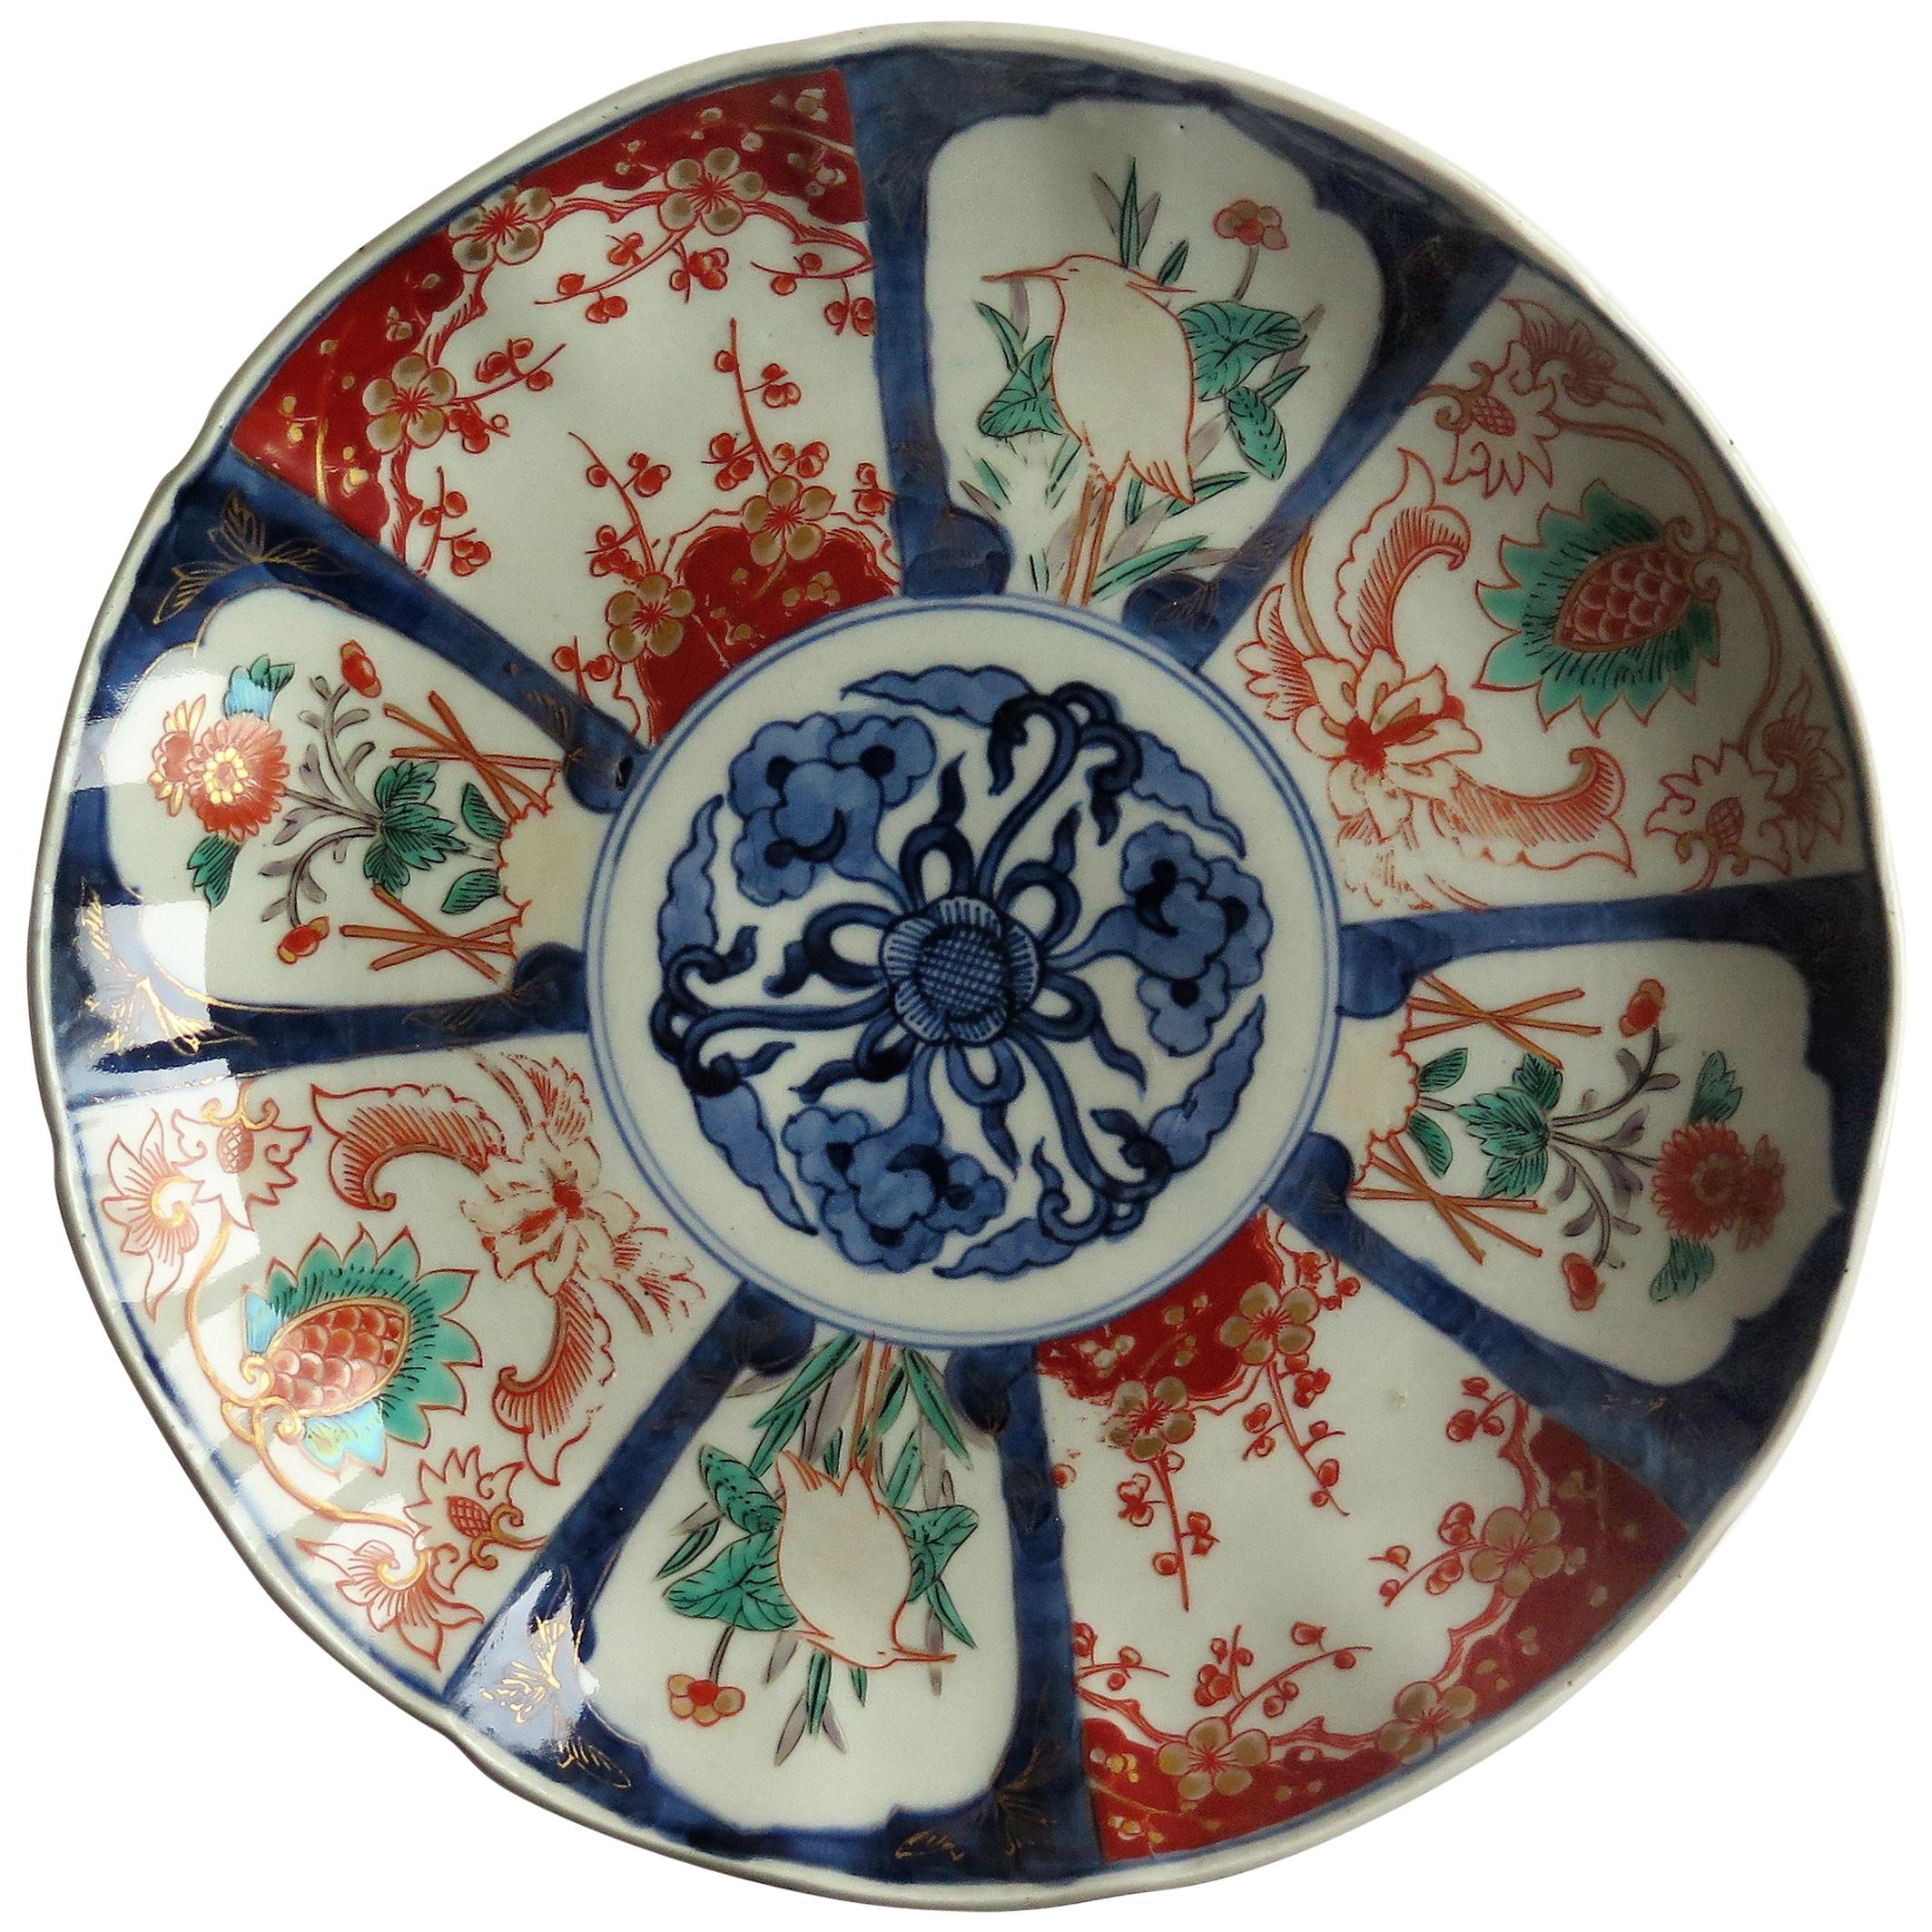 Japanese Porcelain Large Plate or Hand Painted Imari, 19th Century Meiji Period 